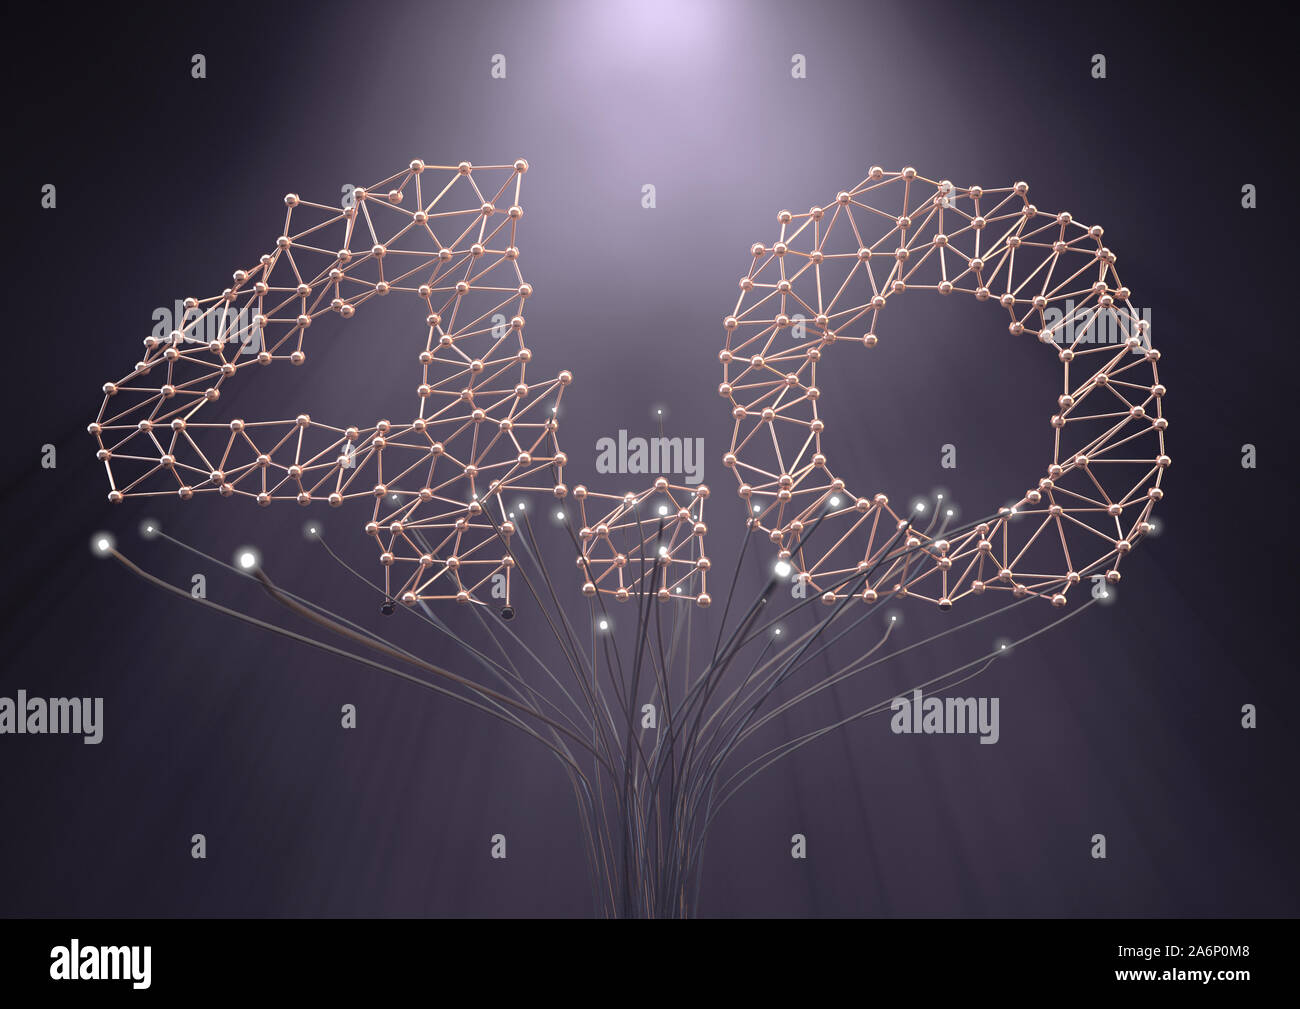 A concept futuristic tree made of metal and fiber optic wire and the number 4.0 in a plexus design depictiong the 4th industrial revolution - 3D rende Stock Photo